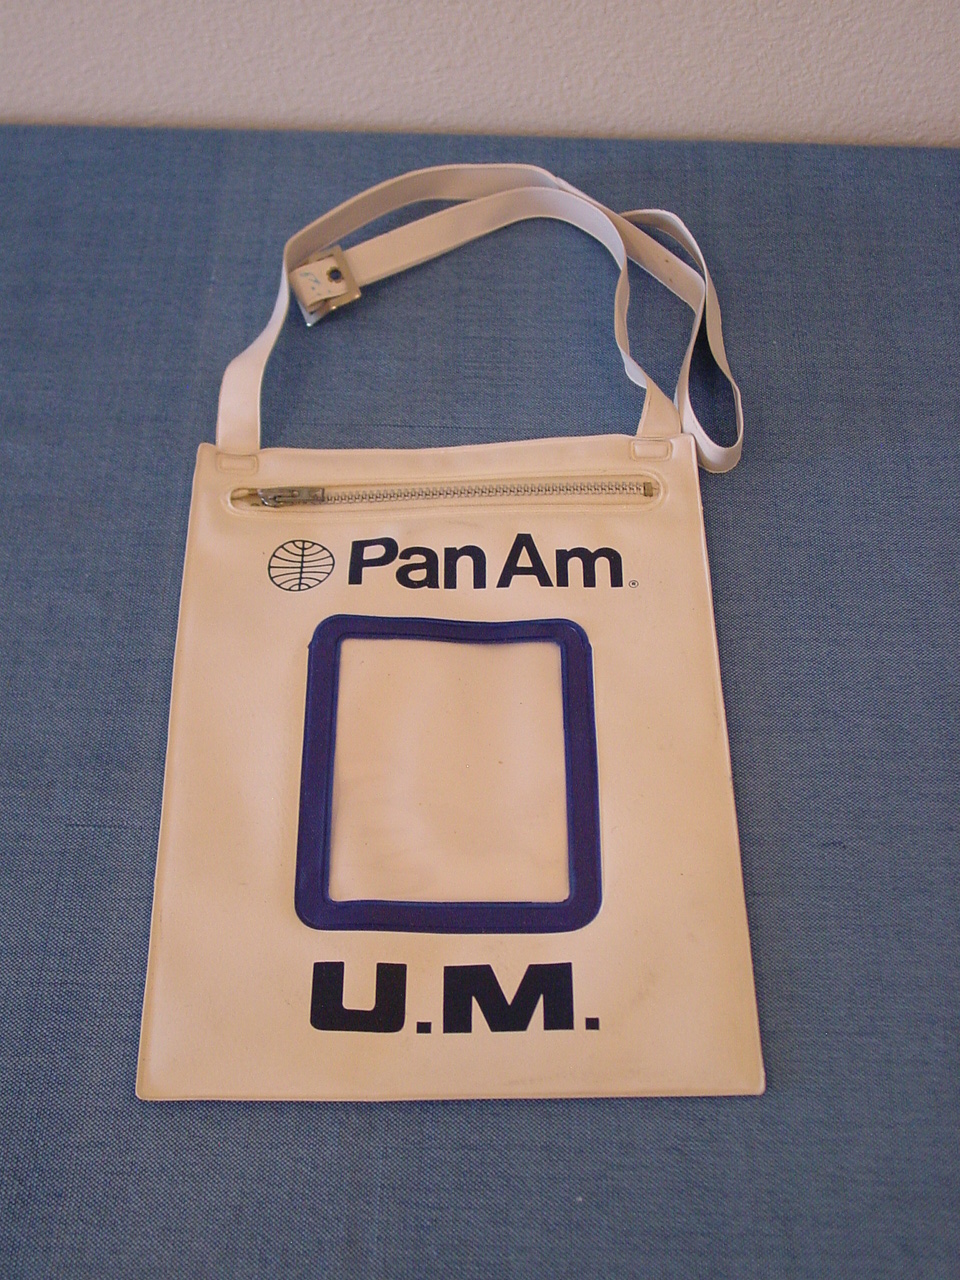 For young unaccompanied minors Pan Am had a pouch for them to wear so they could be easily identified by flight and ground crew.  This sameple in the Helvetica style dates from the early 1970s.